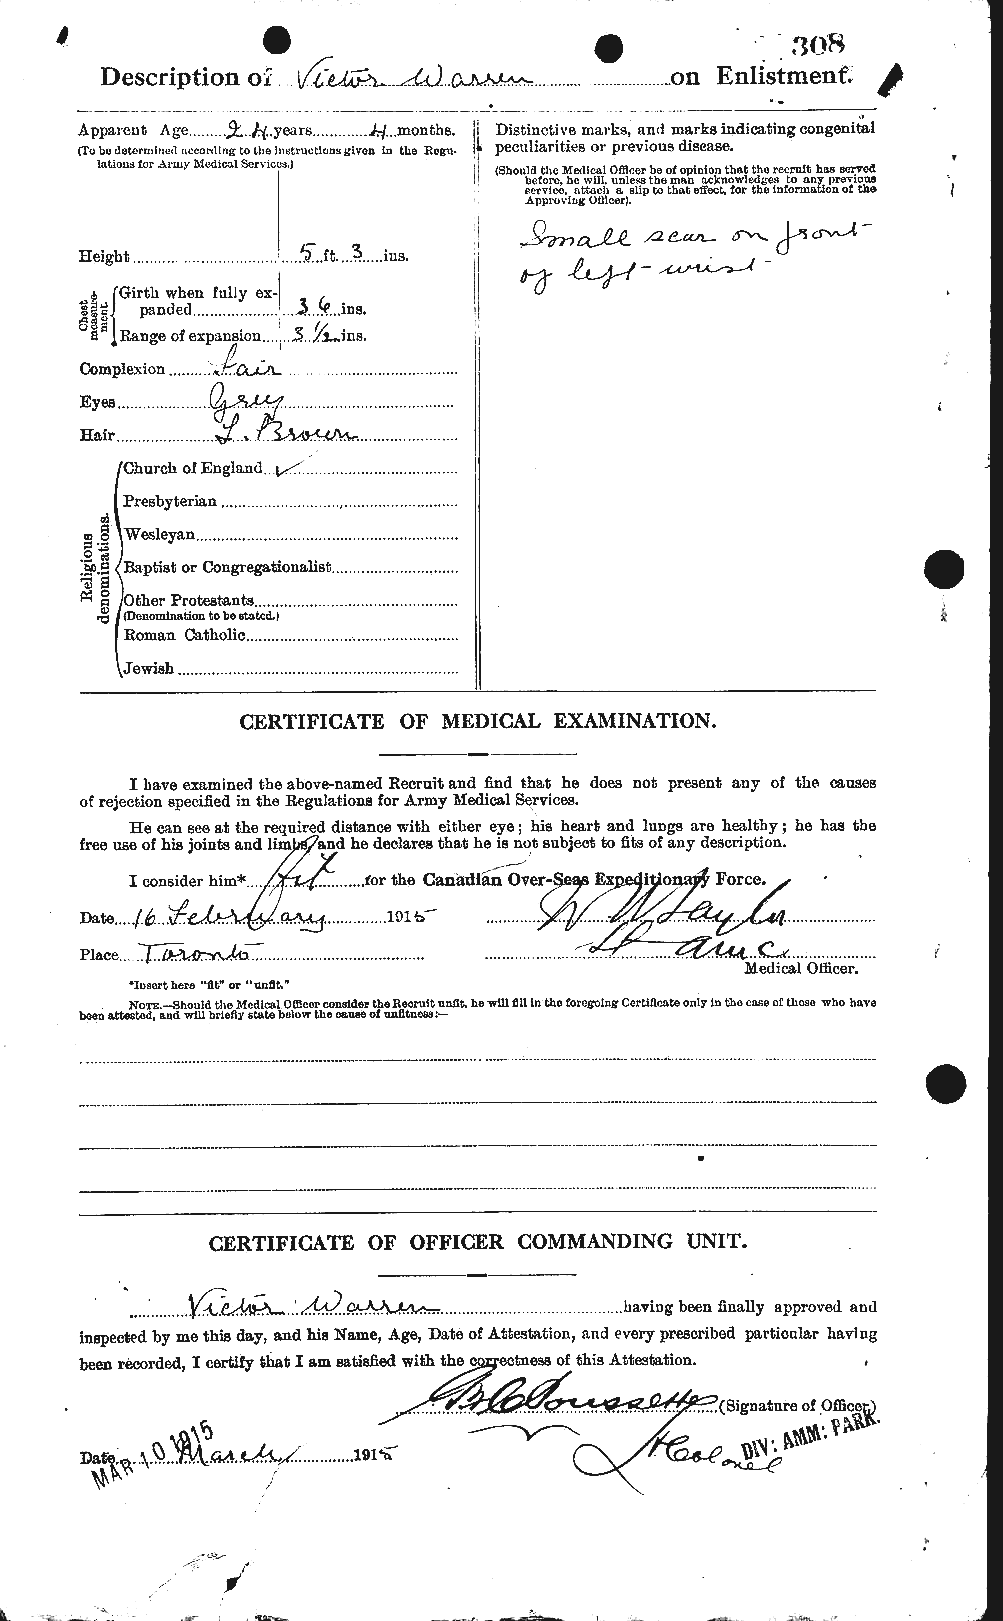 Personnel Records of the First World War - CEF 658650b